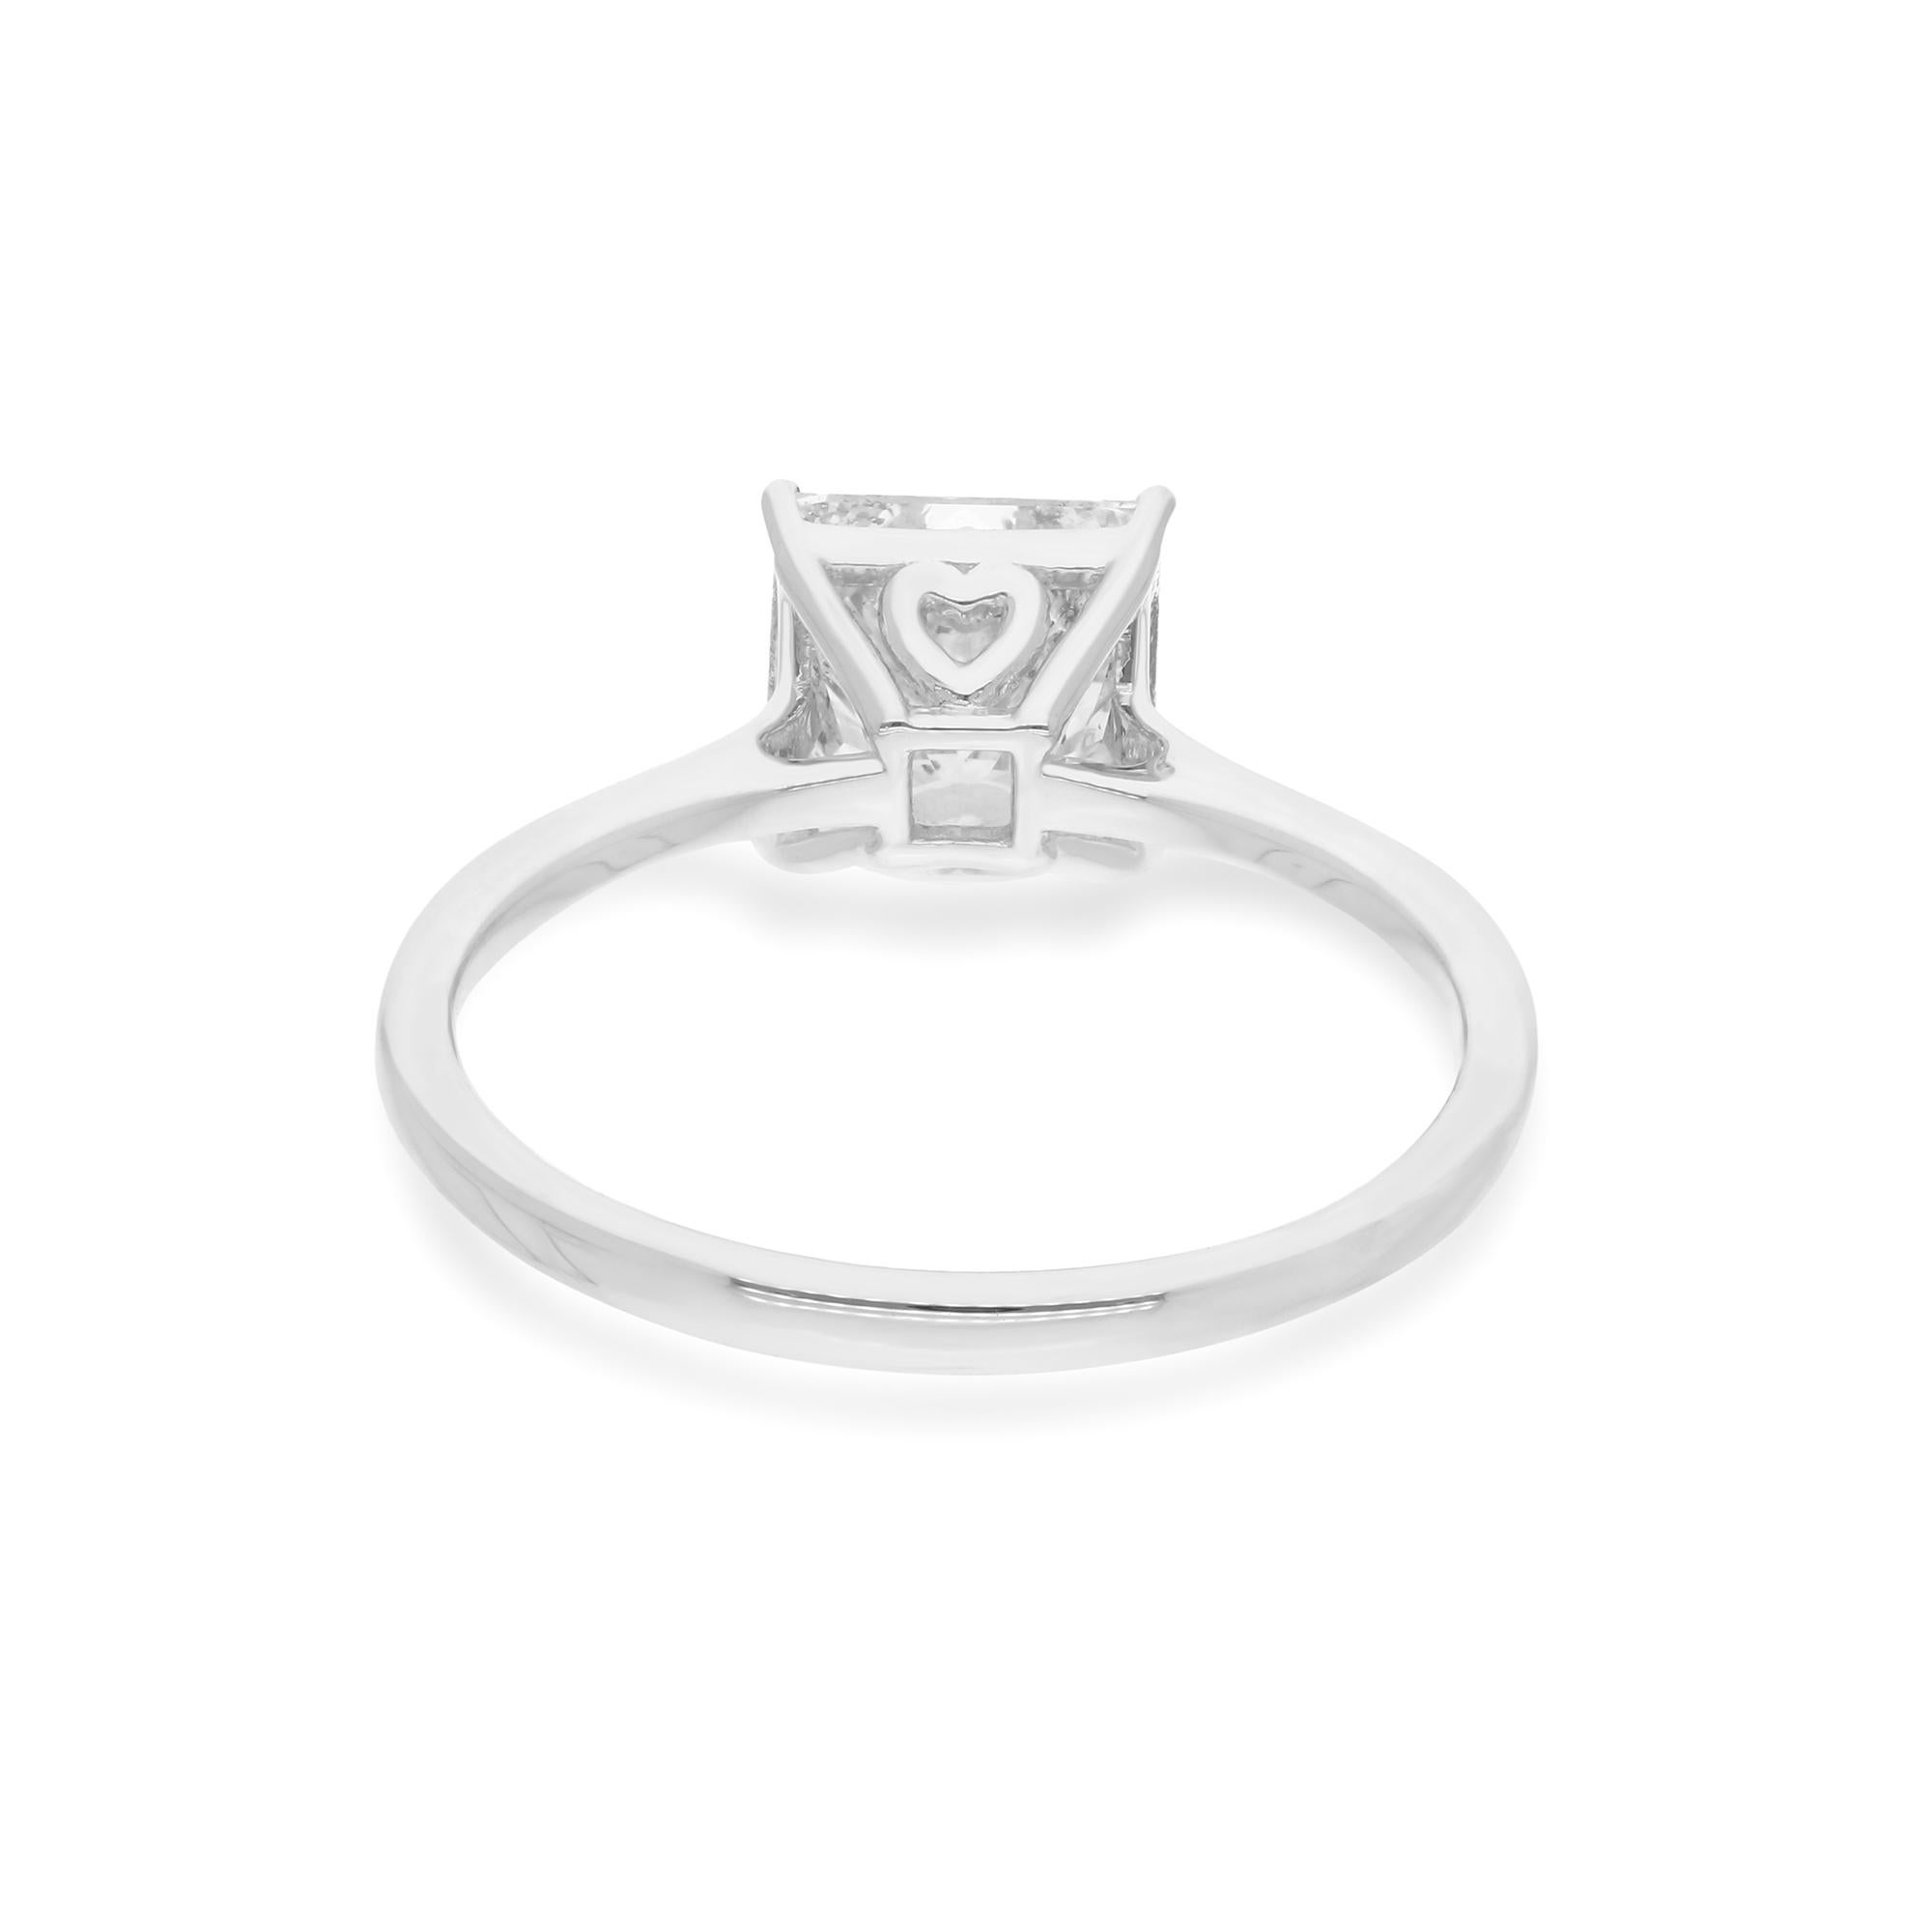 Step into a world of timeless elegance with this Solitaire Princess Cut Diamond Wedding Ring, meticulously handcrafted in luxurious 18 Karat White Gold. This exquisite piece of handmade jewelry is a radiant symbol of eternal love and commitment,